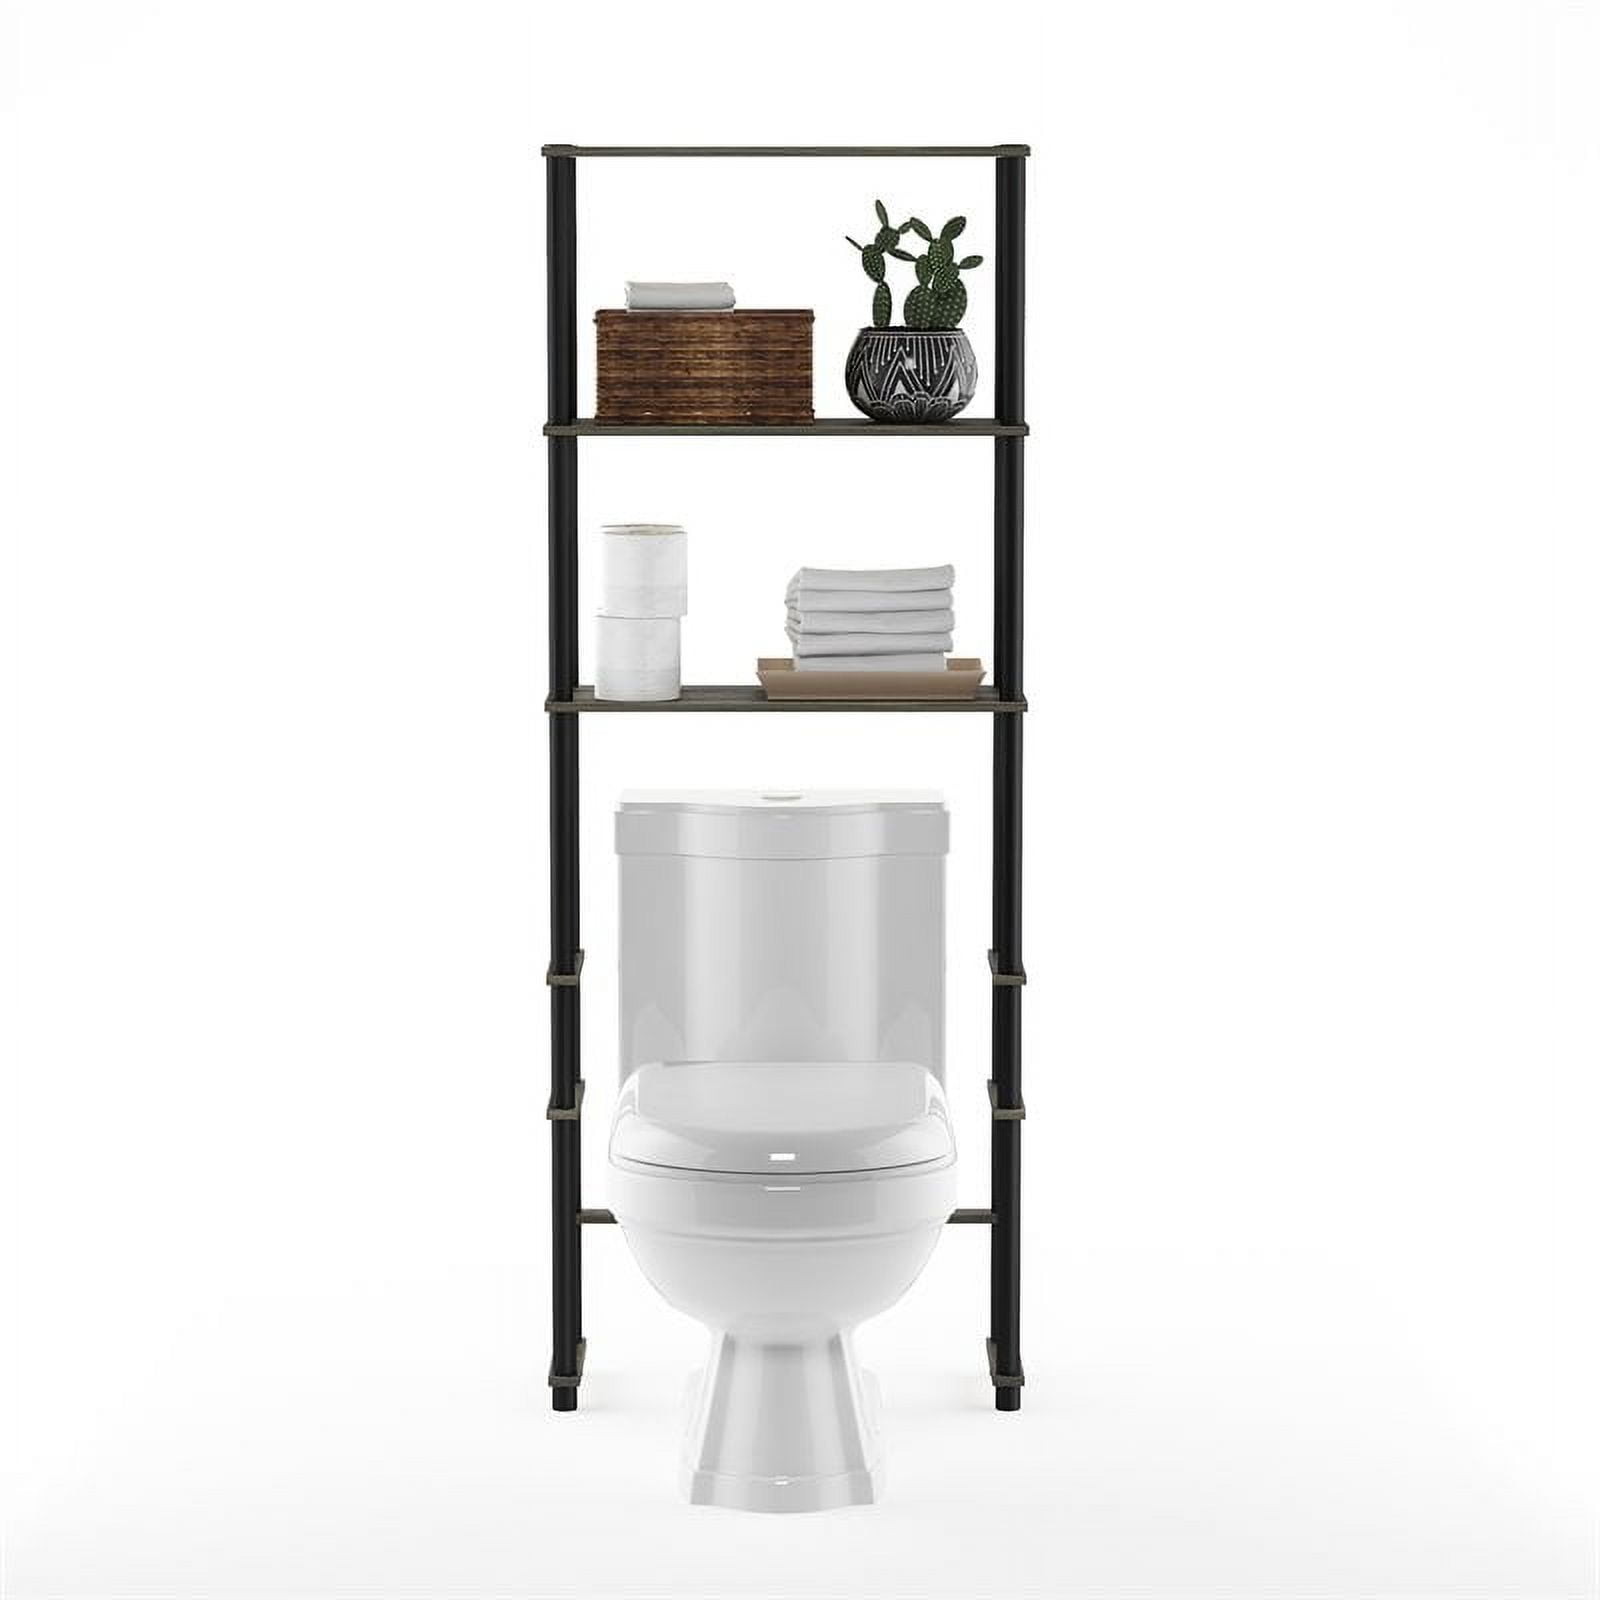 I Never Loved the Look an Over-the-Toilet Shelf — Until I Found This One